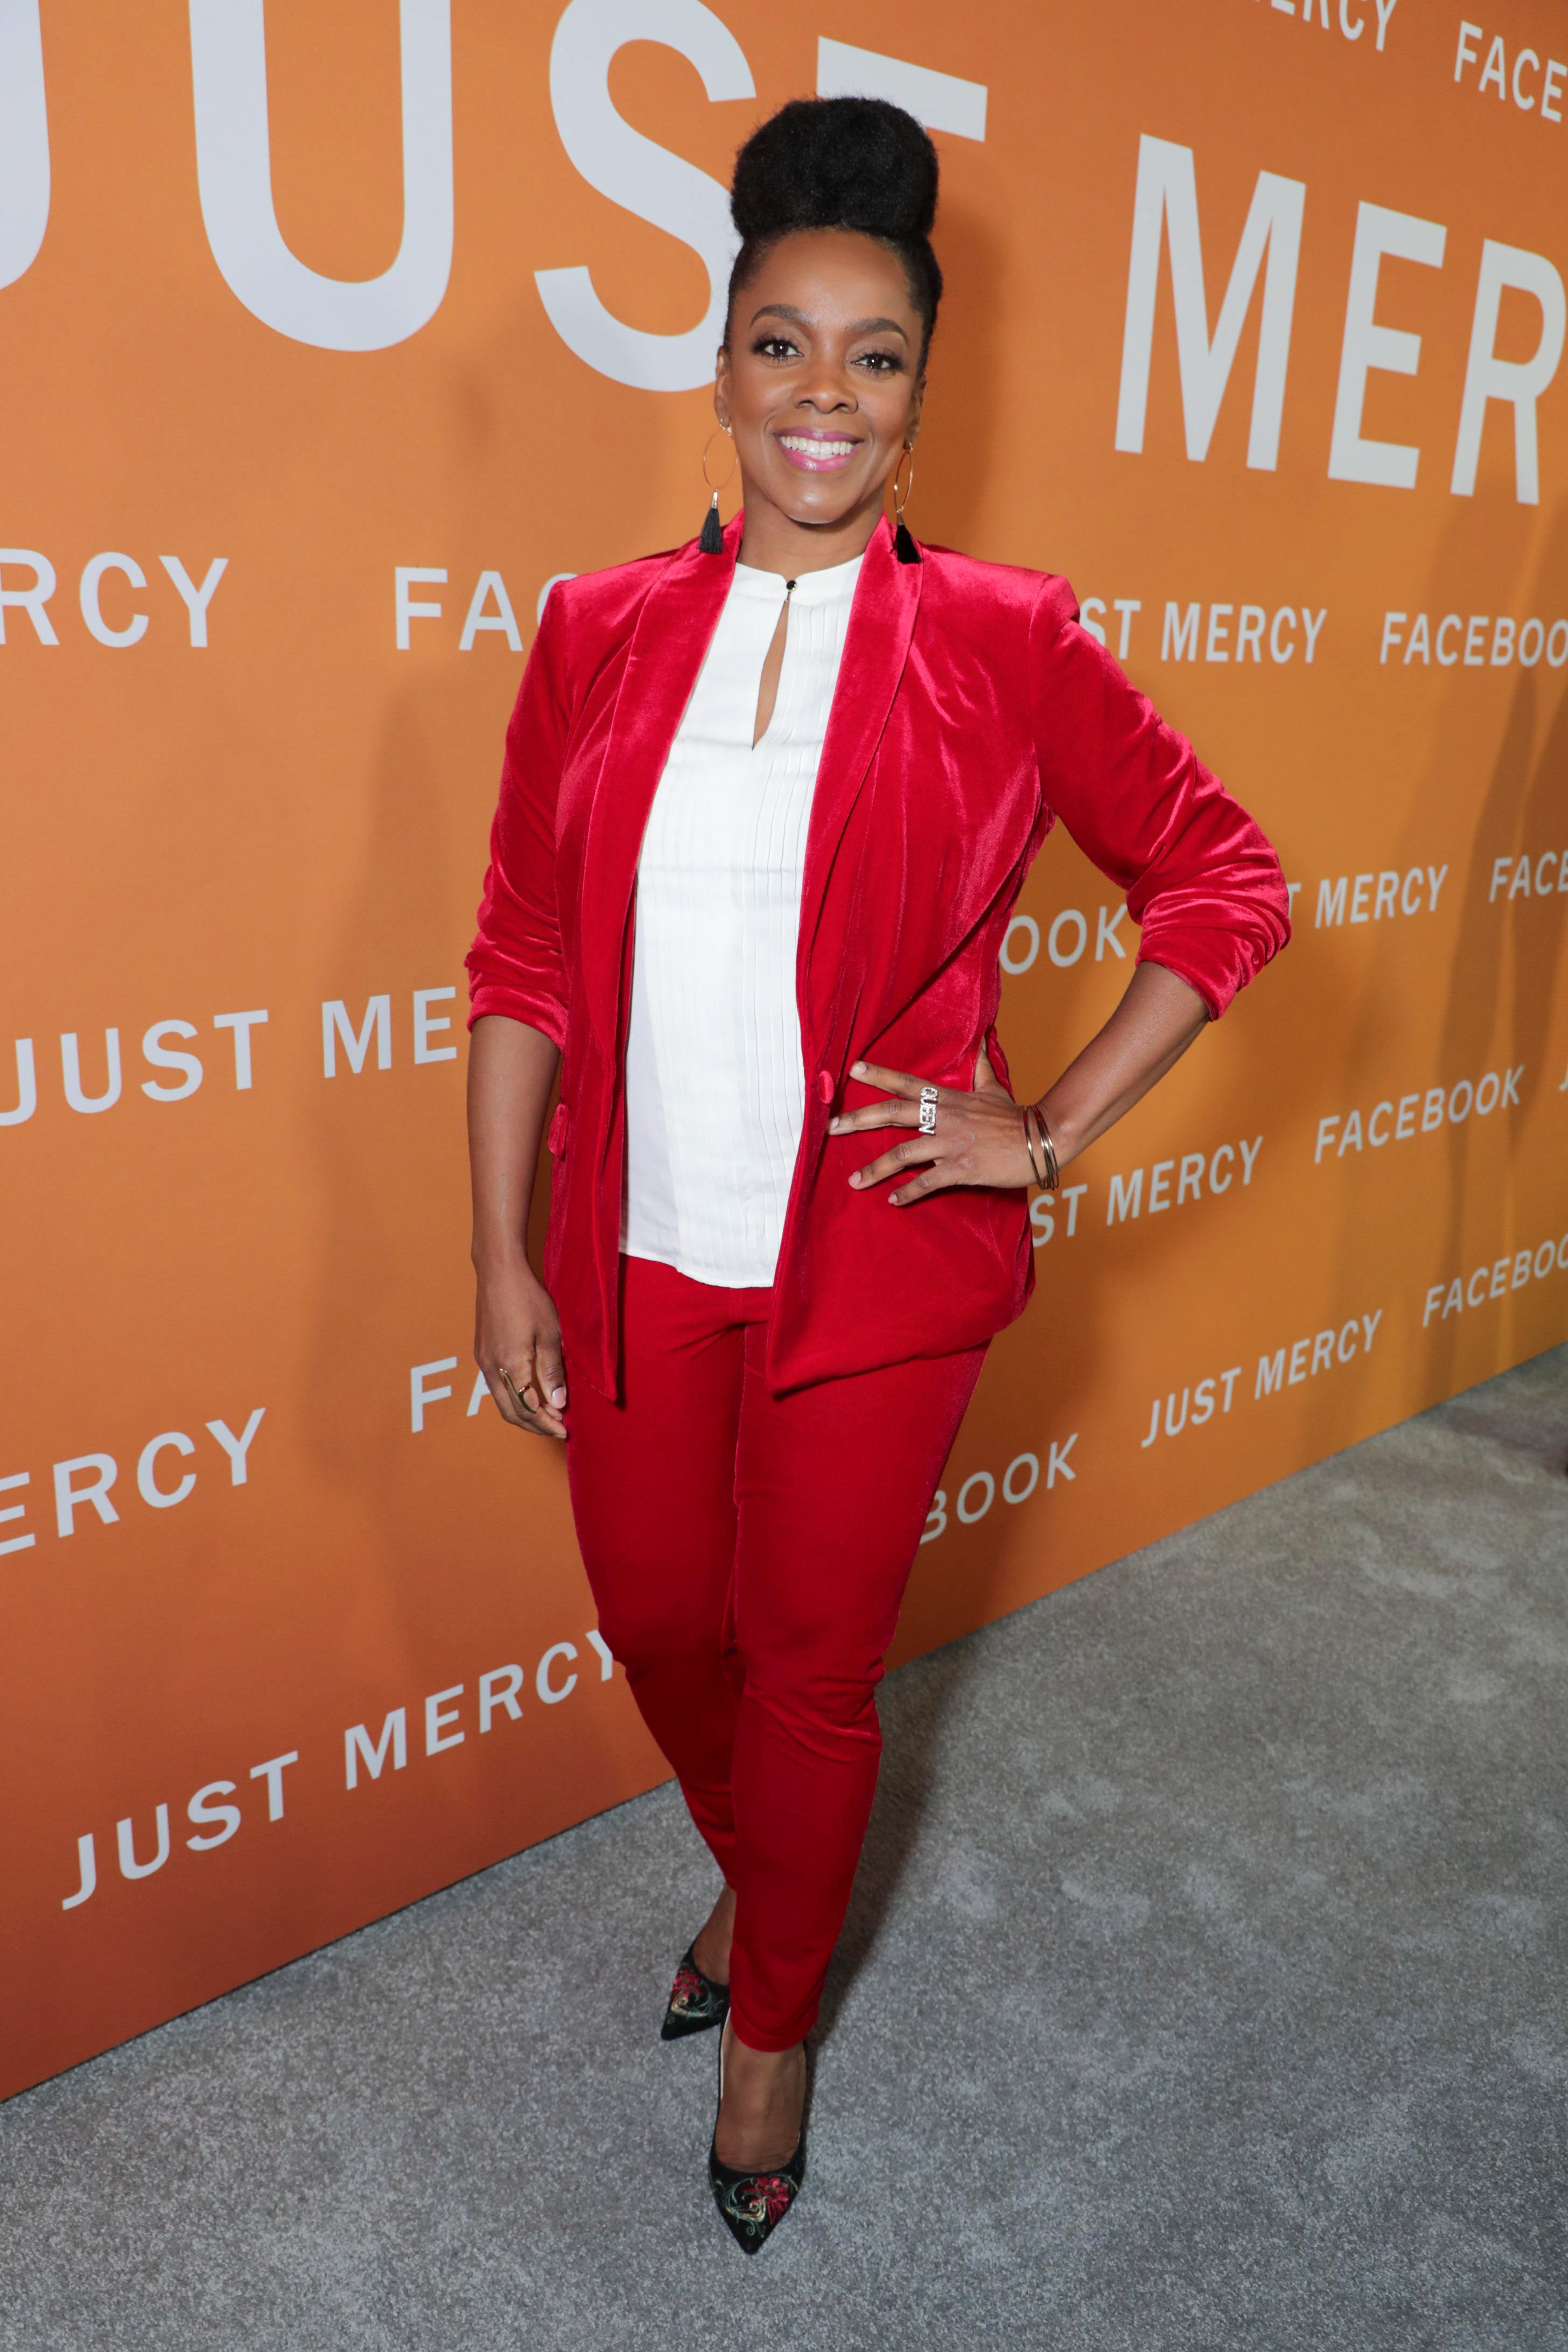 Marsai Martine, Pam Grier, Tika Sumpter, And More Celebs Out And About